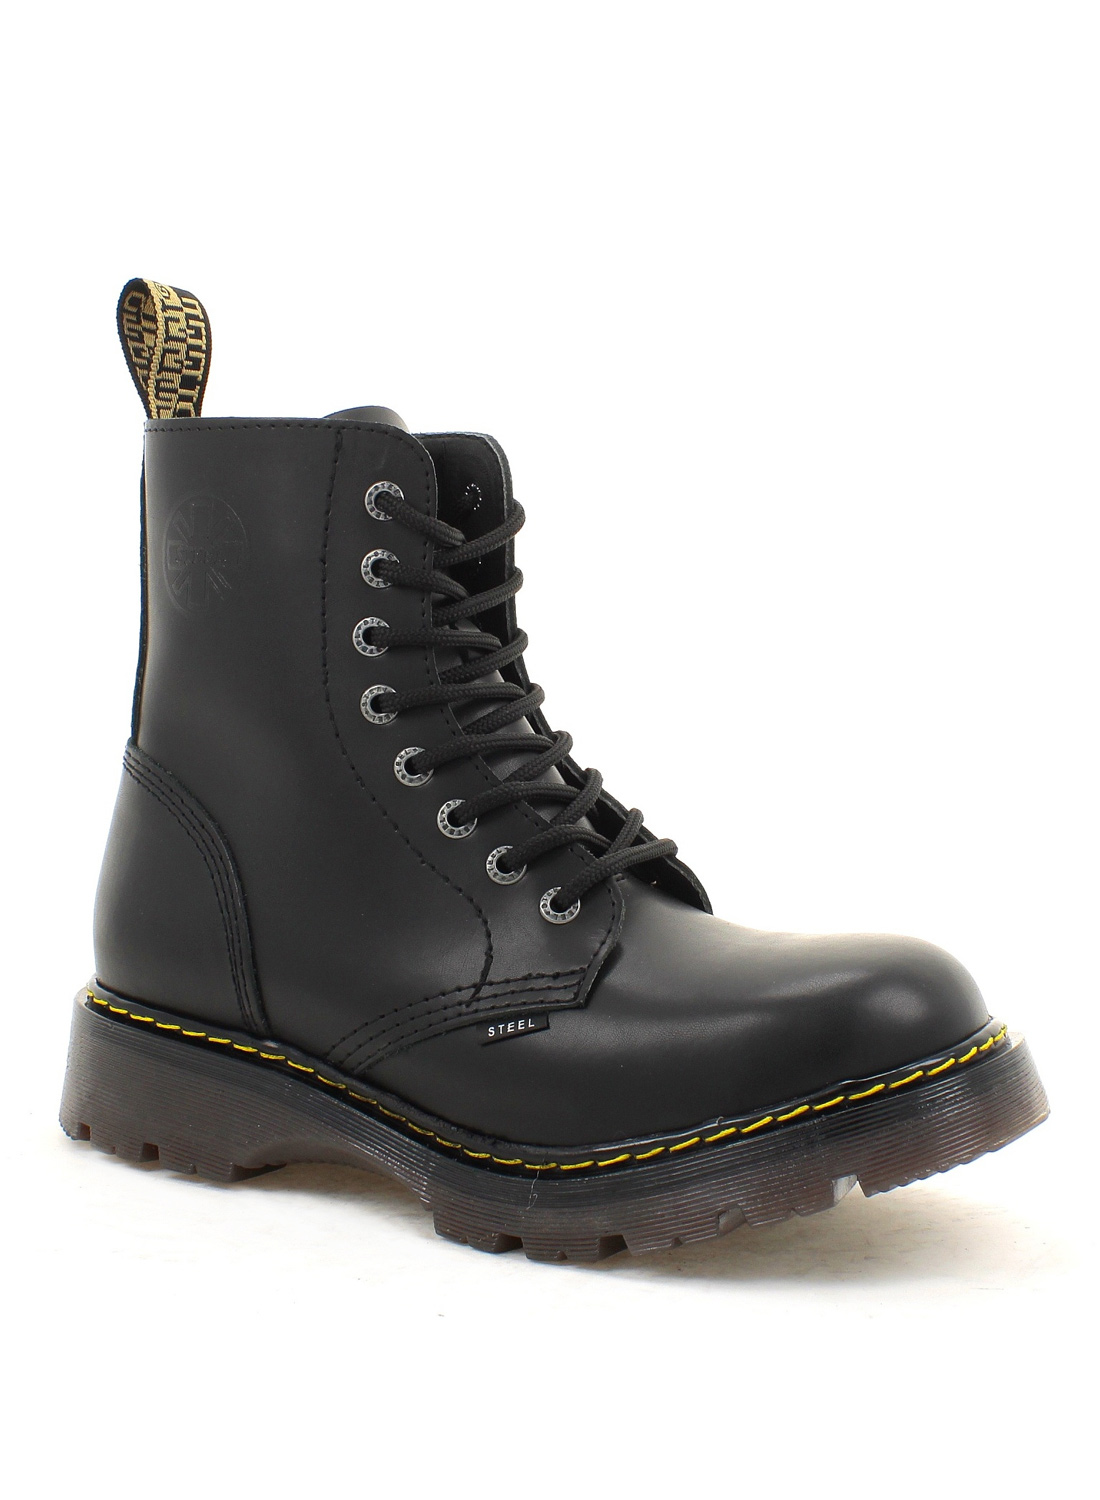 Steel 8 Holes High Air Sole boots